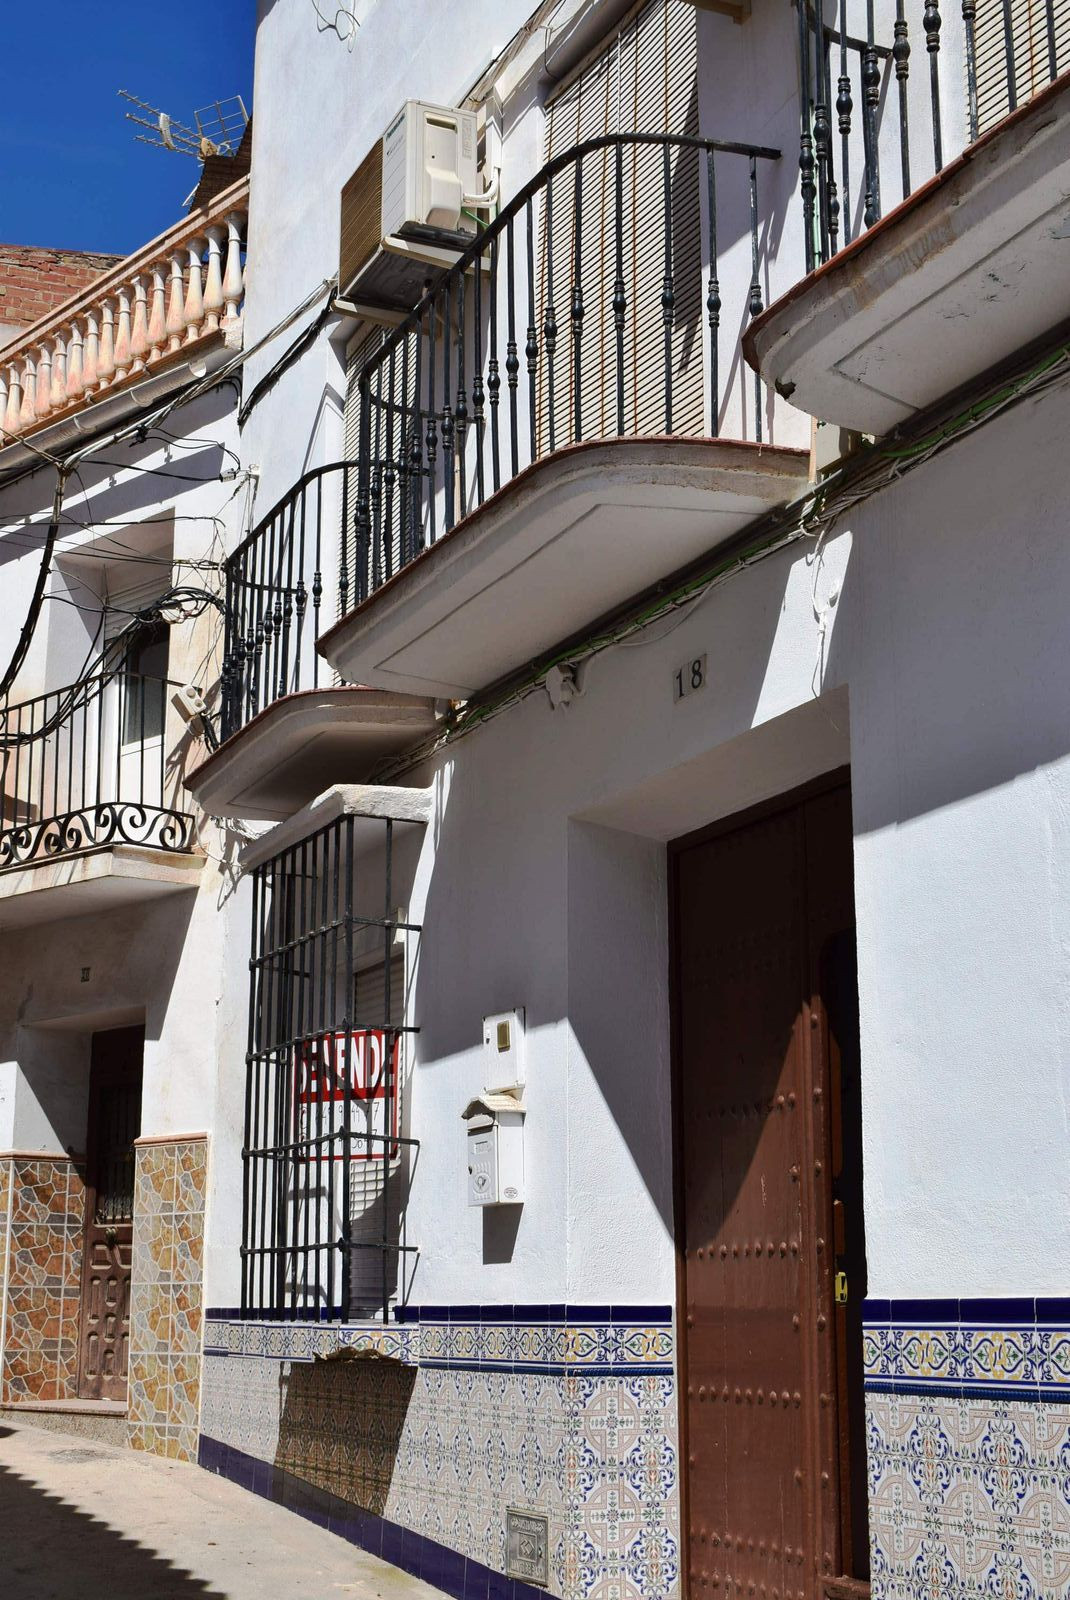 This large townhouse is located in the heart of Benamargosa, a step away from all amenities and only, Spain